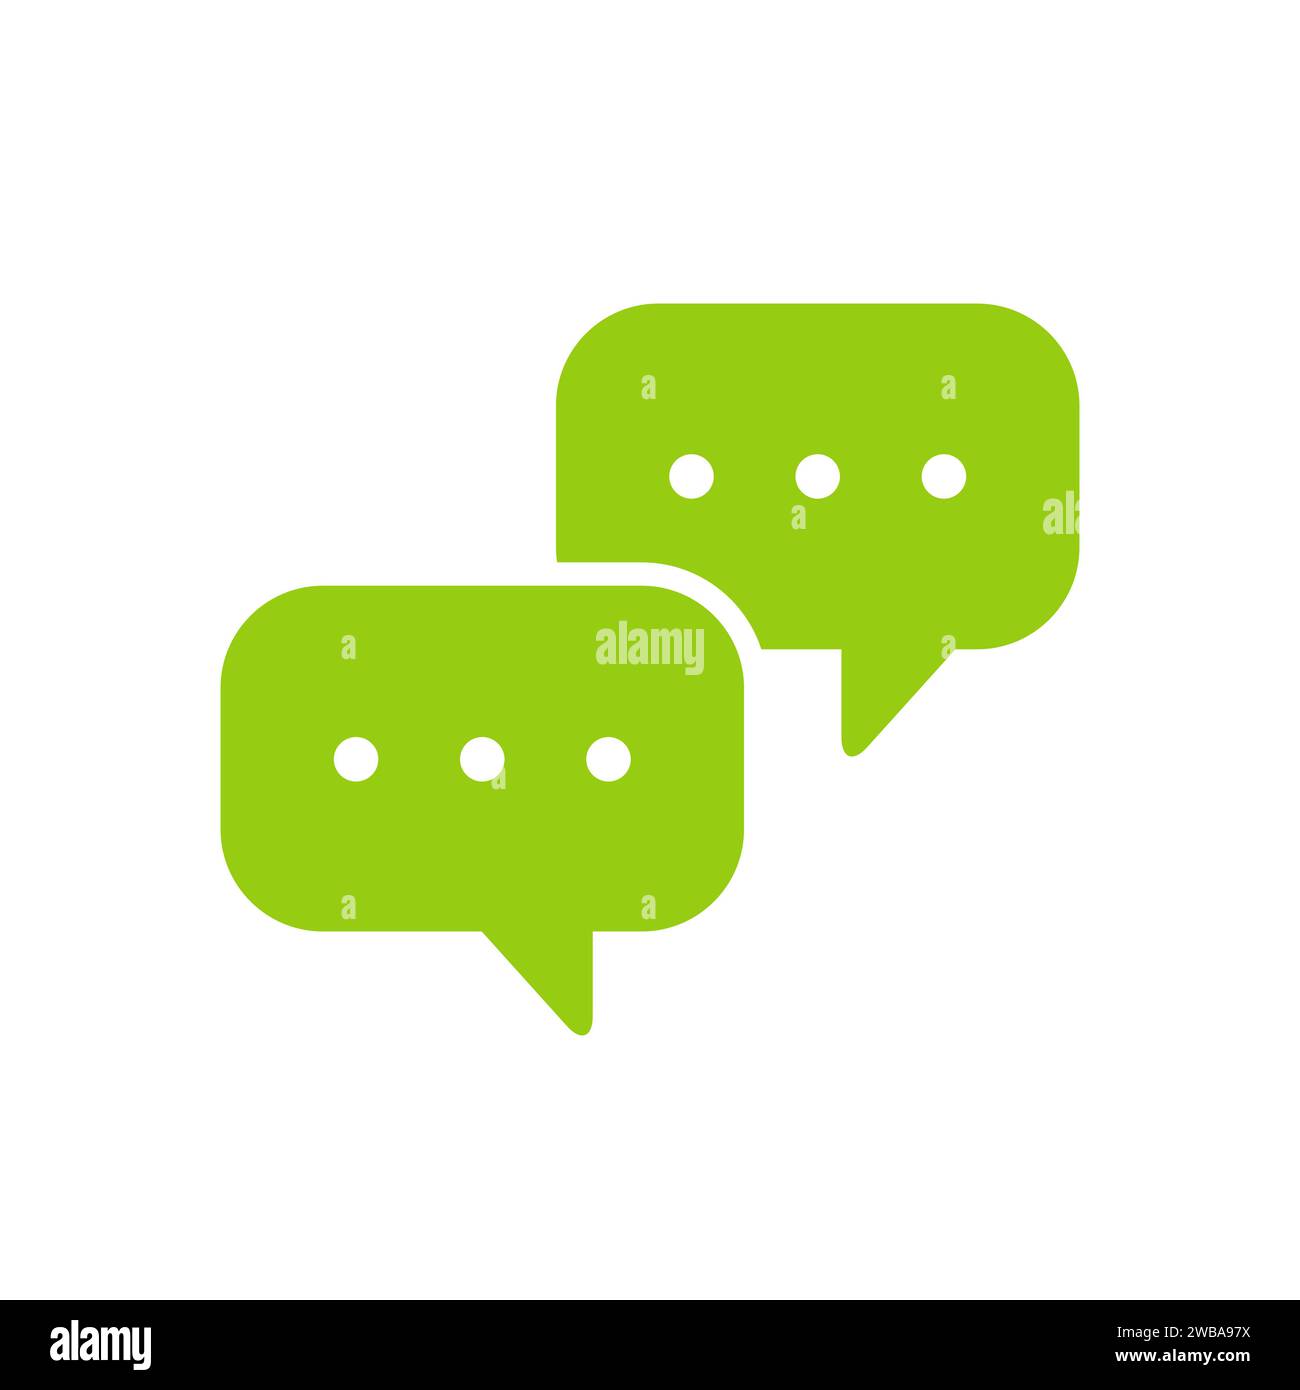 Speech Chat conversation icon. Flat design. Green icon on white background. Stock Vector